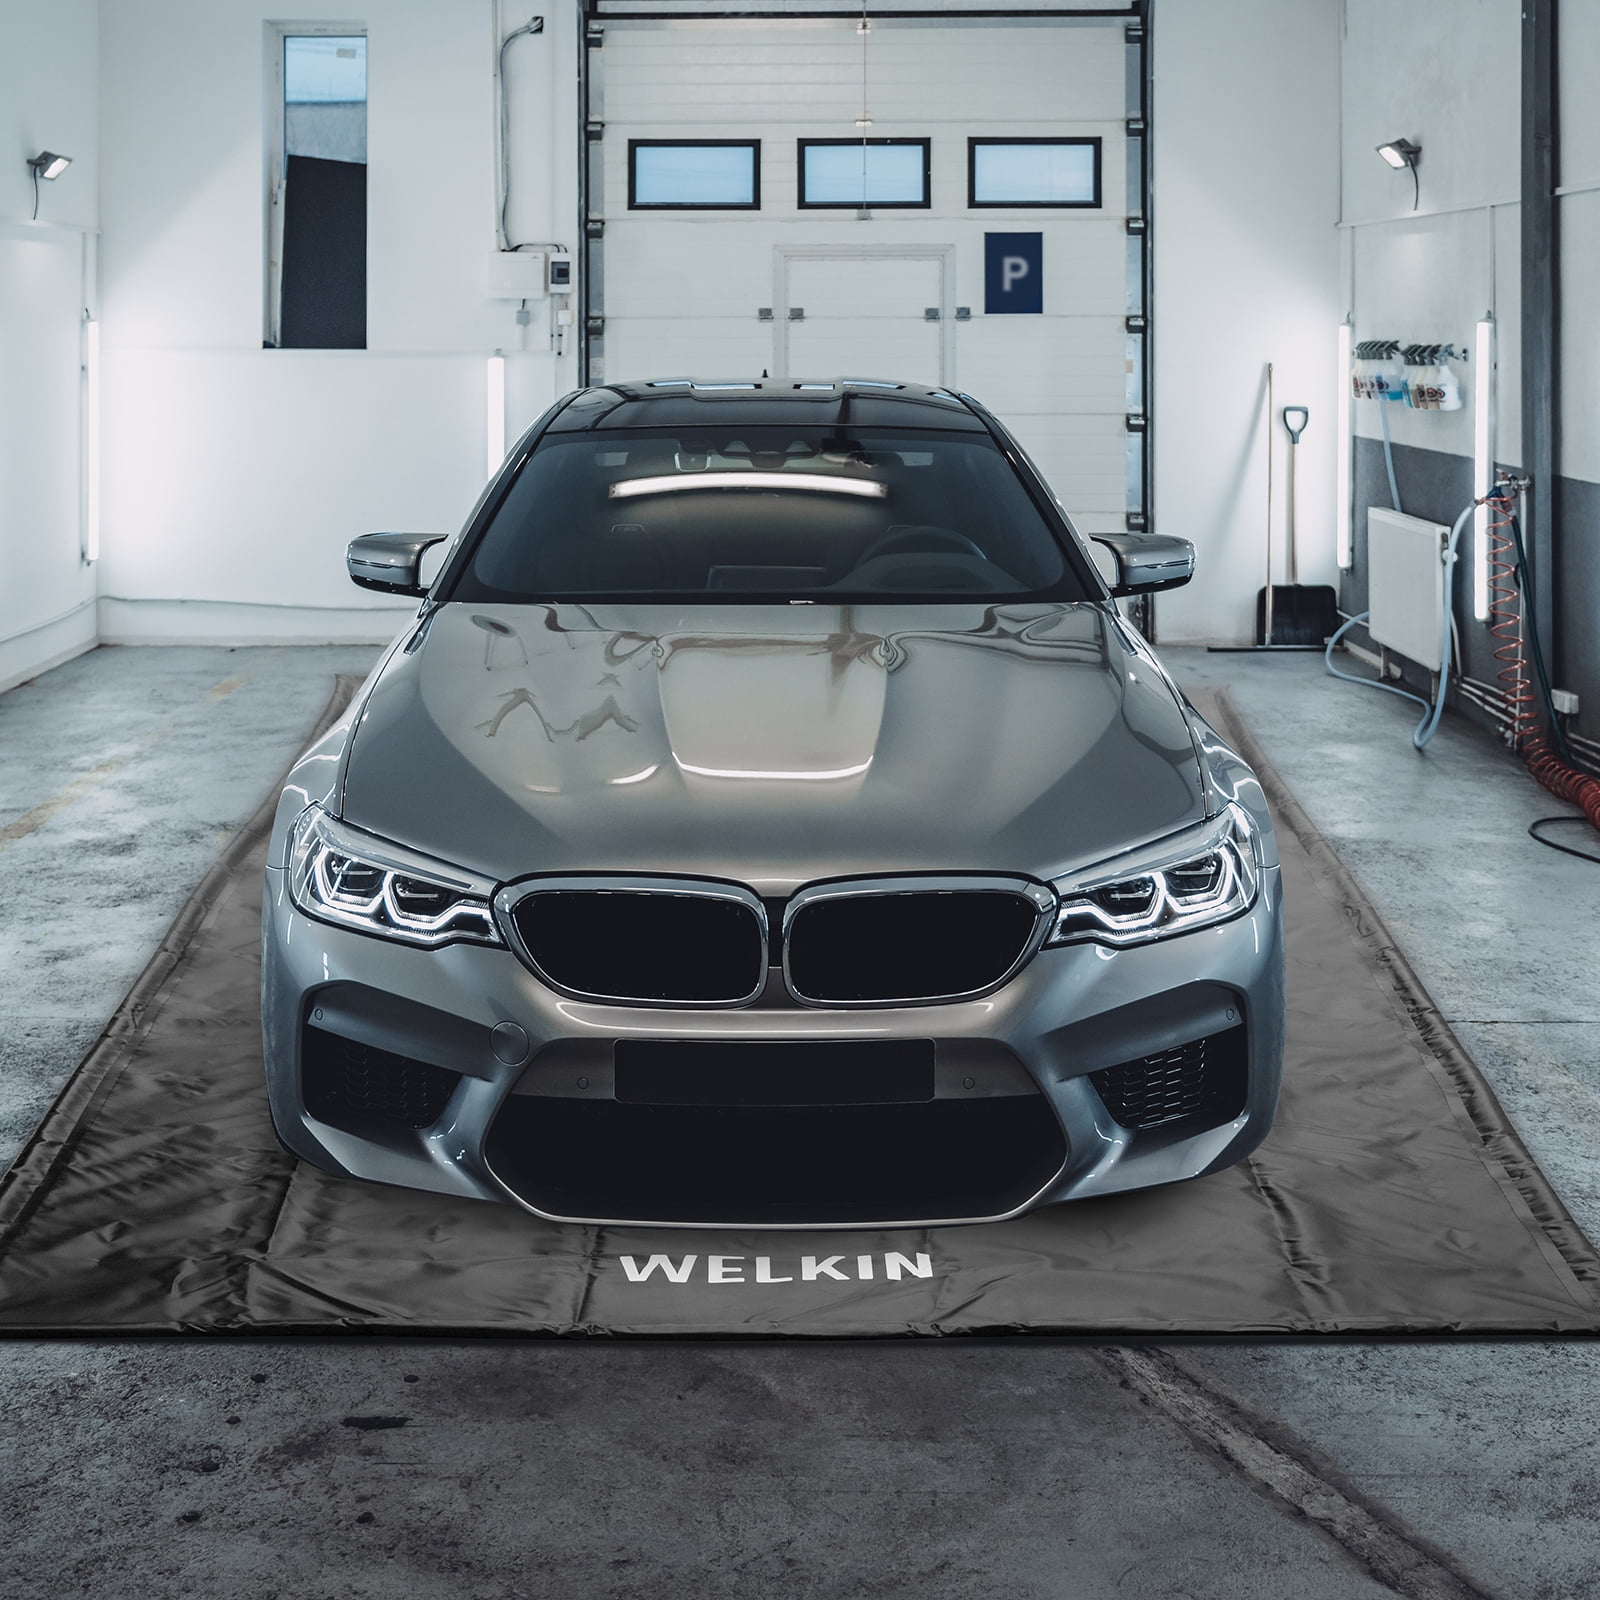 Welkin Containment Mat 7 9 X 18 Non Slip Garage Floor Heavy Duty Waterproof Protection For Cars Com